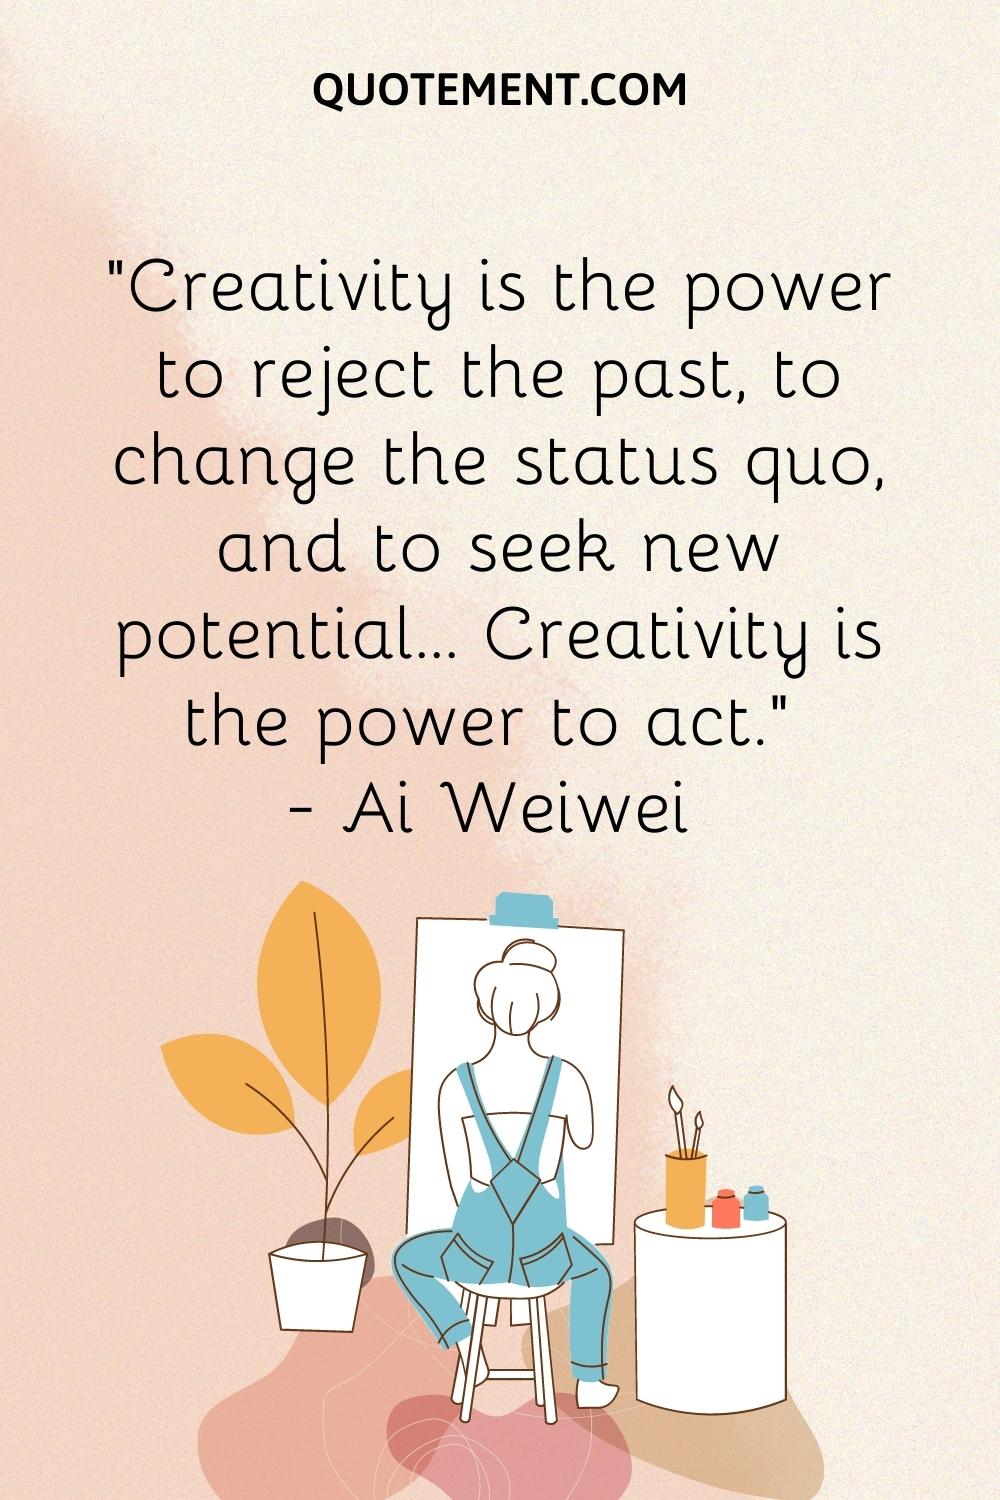 Creativity is the power to reject the past, to change the status quo, and to seek new potential